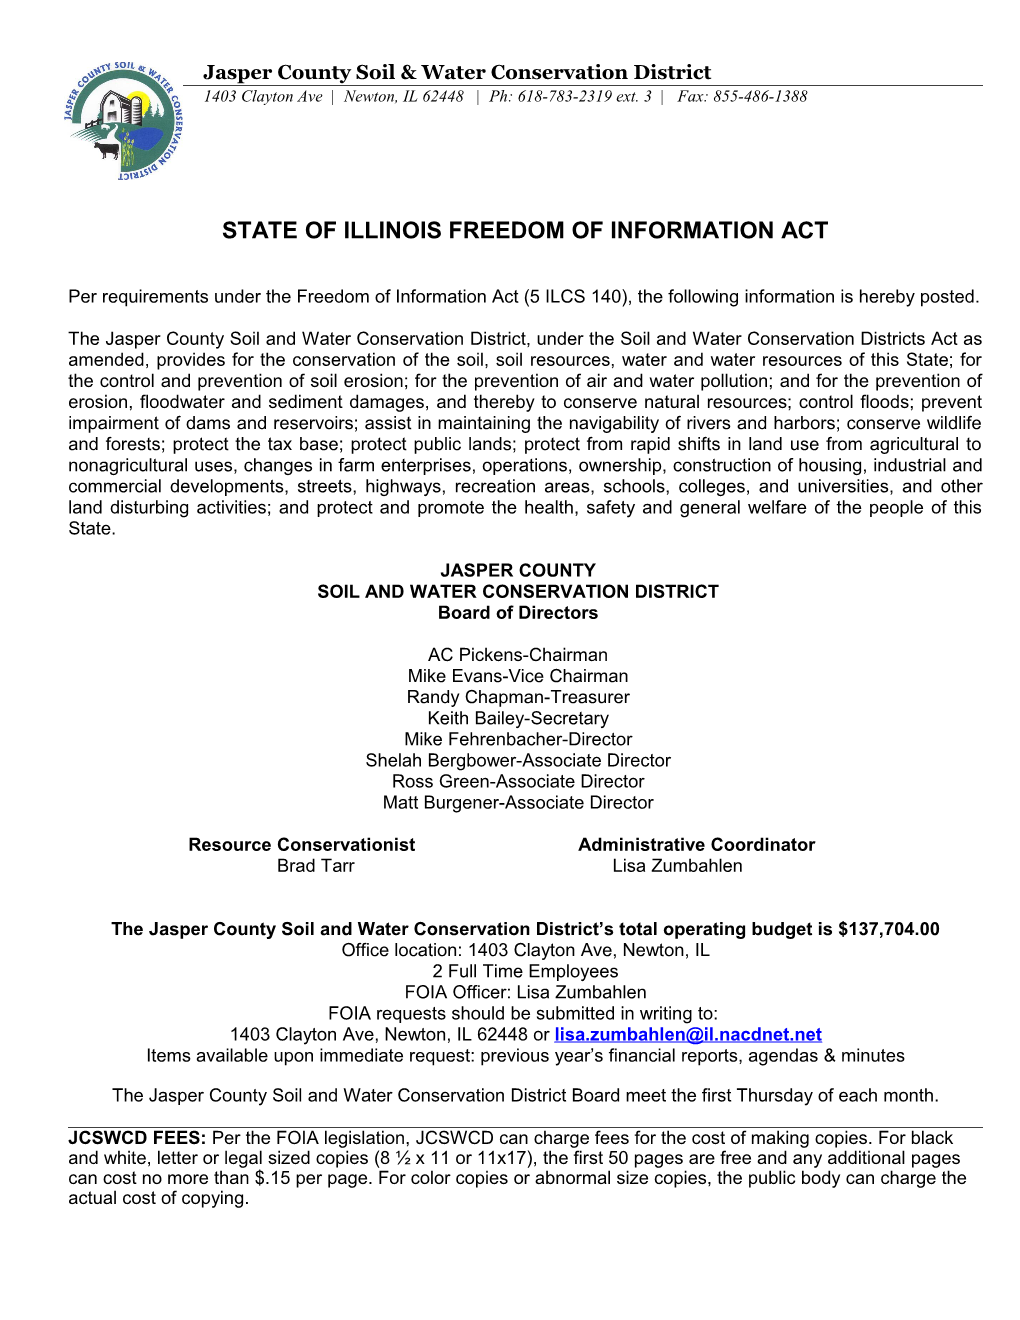 State of Illinois Freedom of Information Act